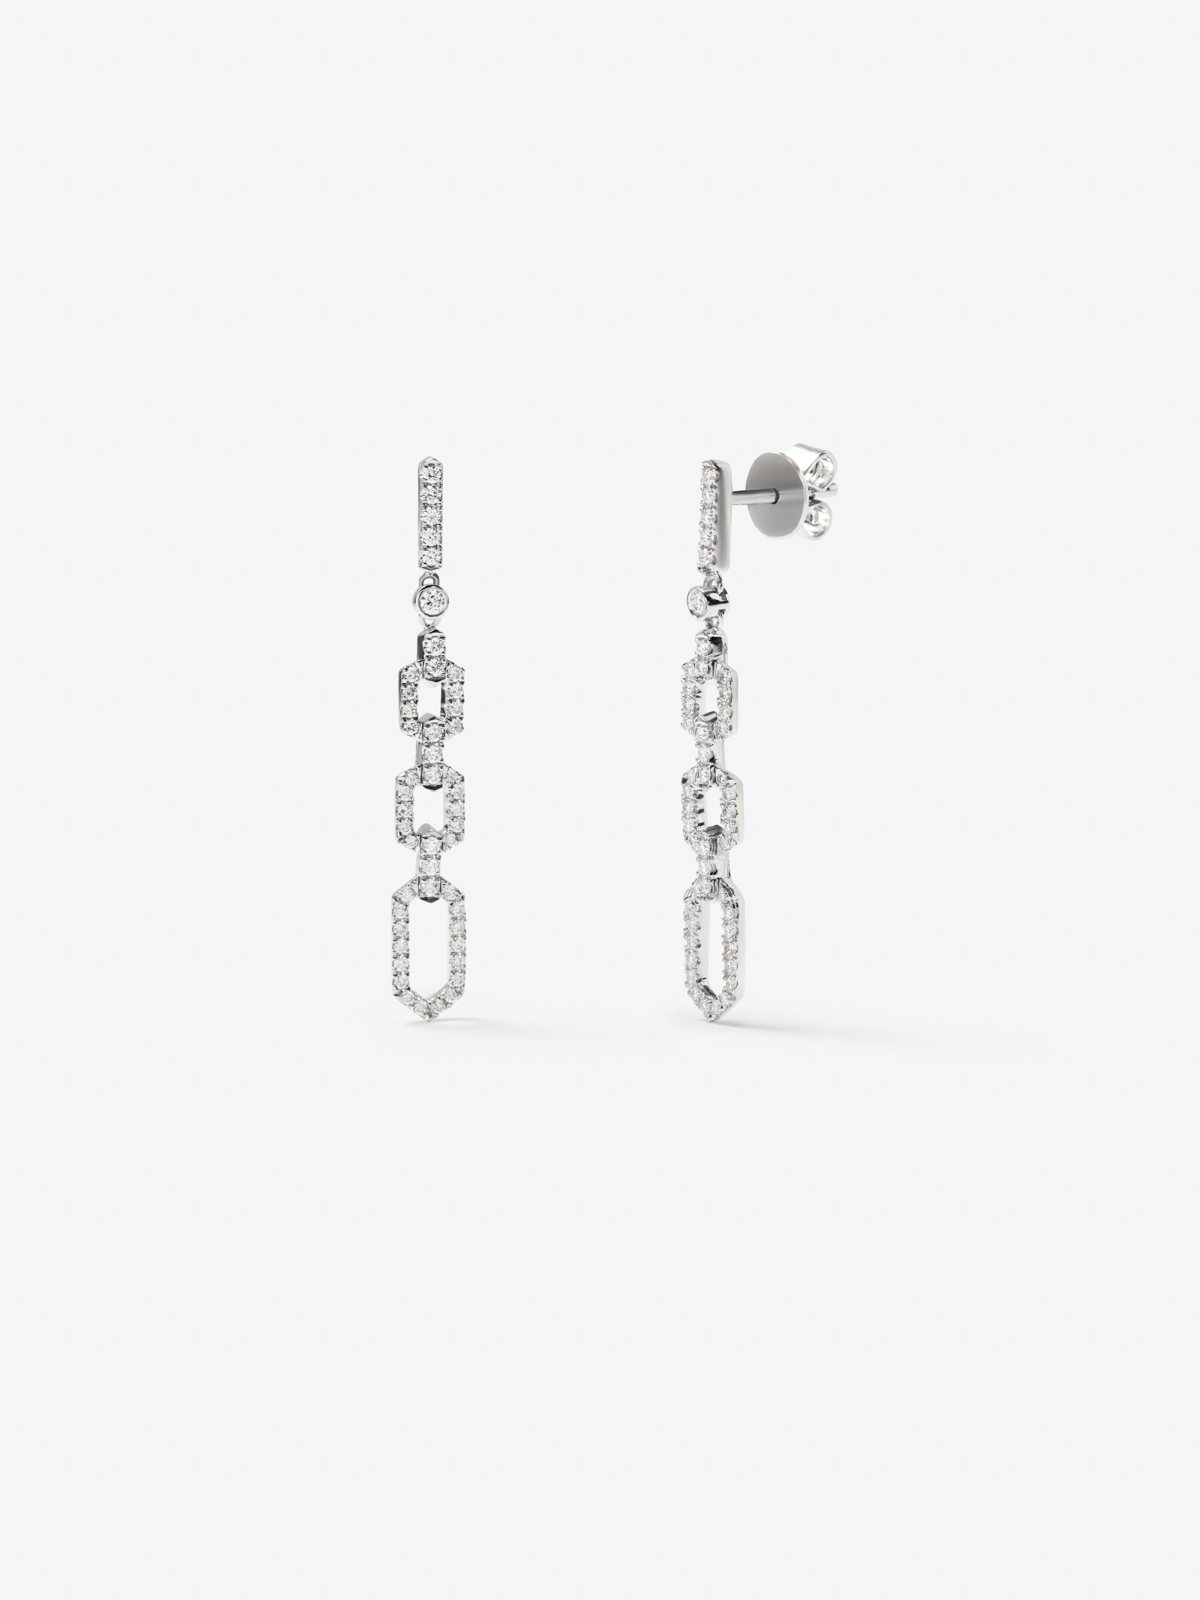 18K white gold earrings with white diamonds of 0.58 cts